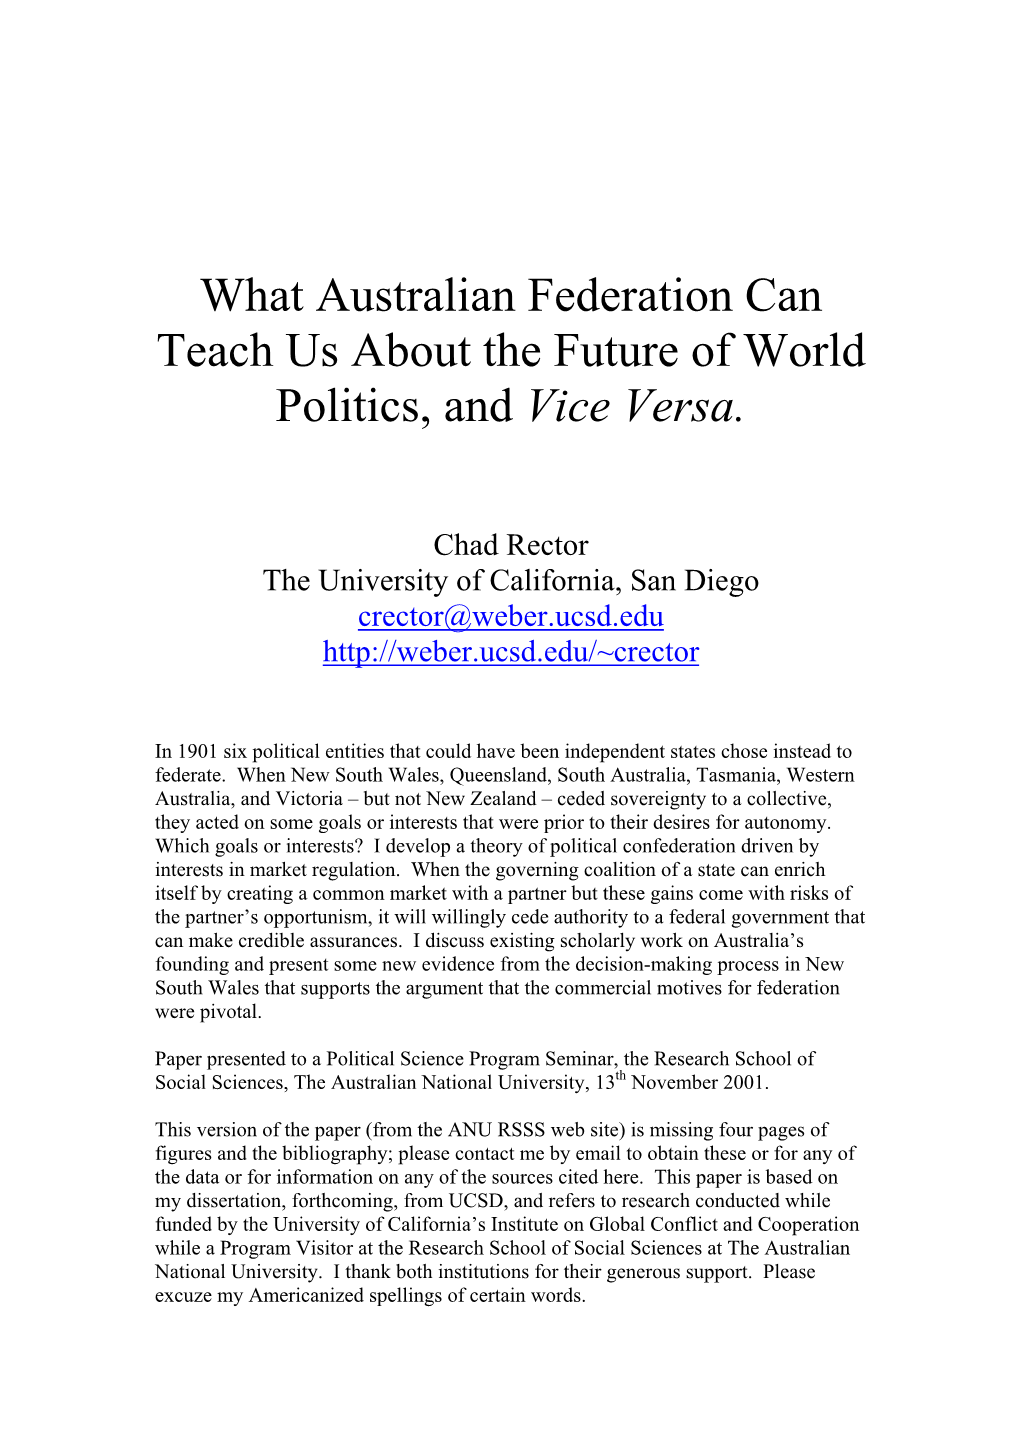 What Australian Federation Can Teach Us About the Future of World Politics, and Vice Versa